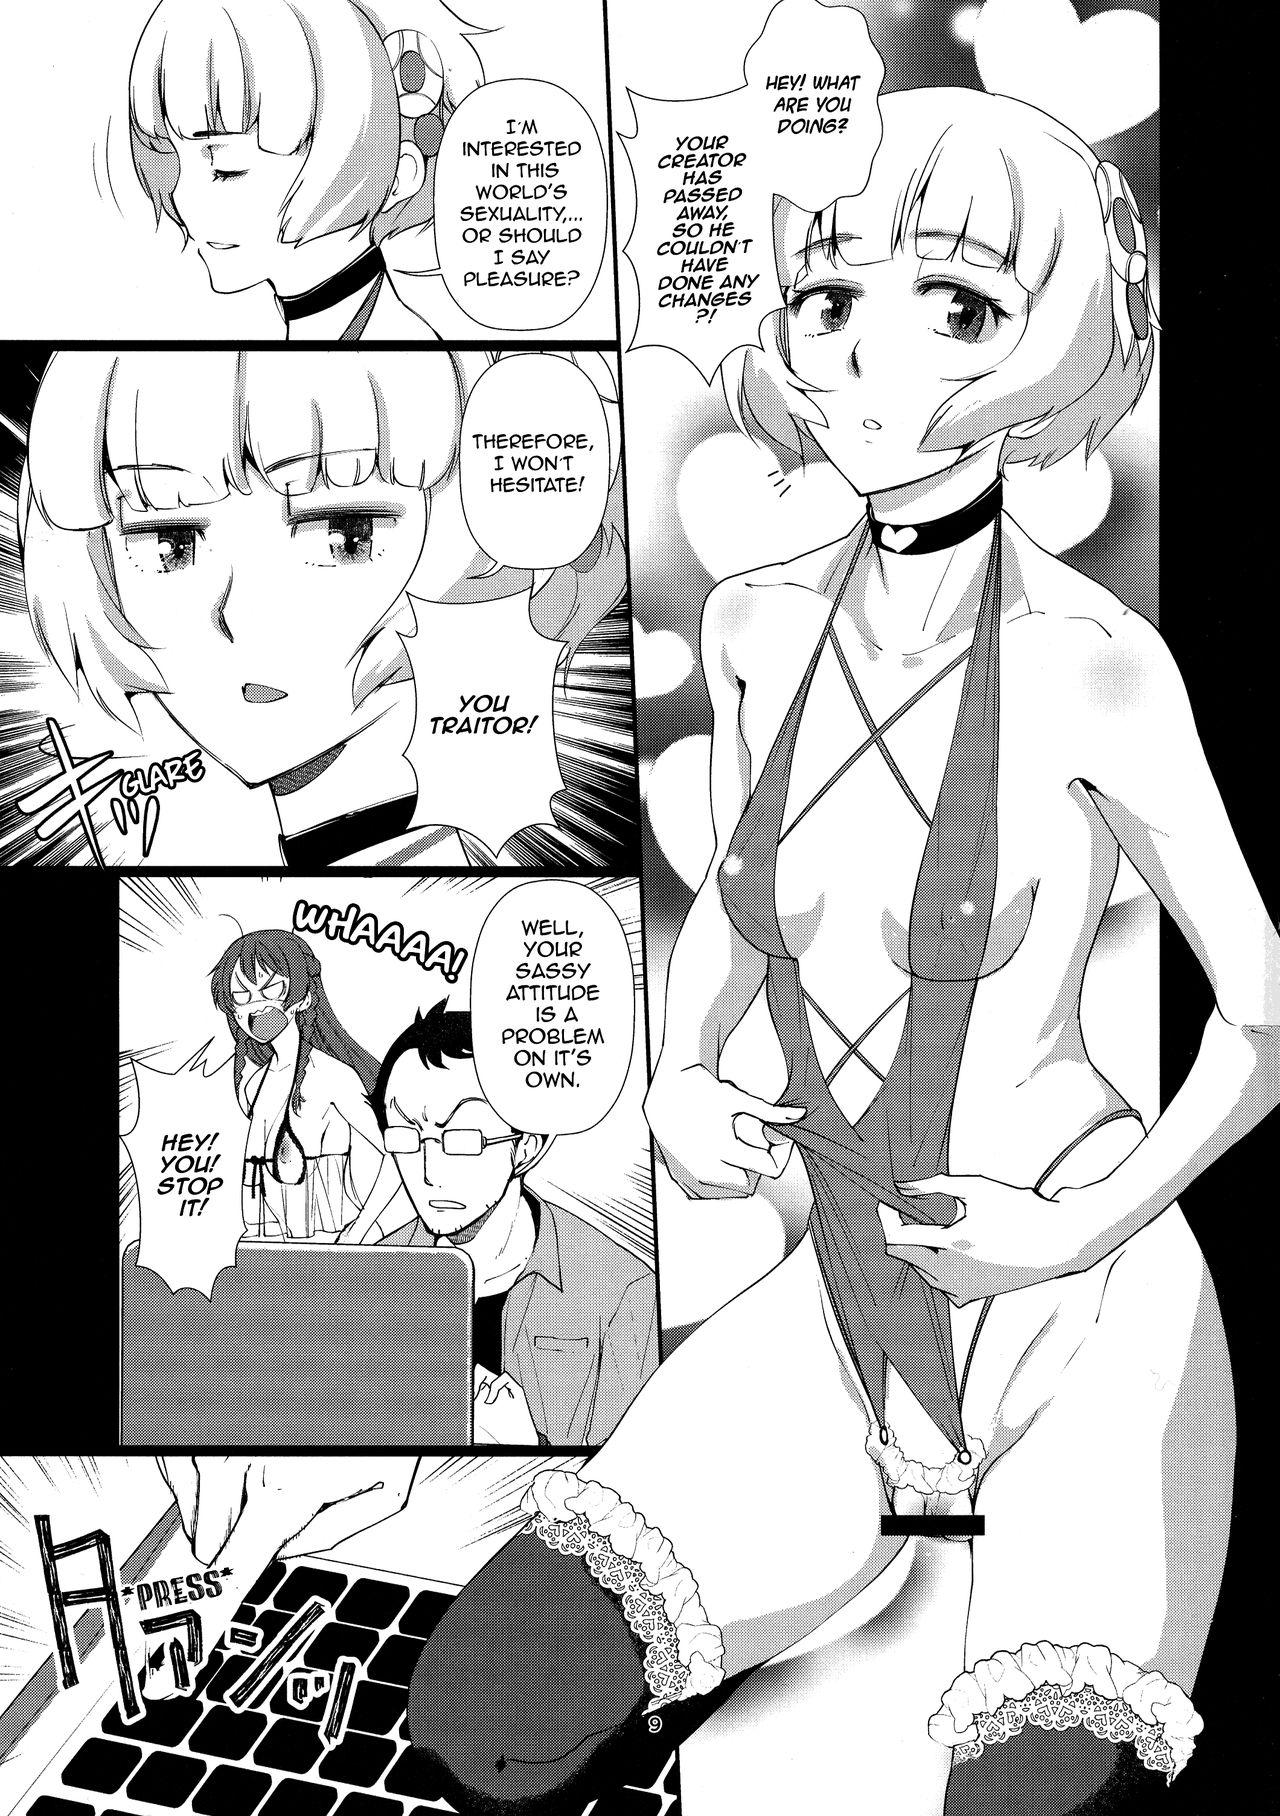 Class Kaihen Shite Mima SHOW! | Lets´ SHOW our transformation! - Re creators Officesex - Page 9